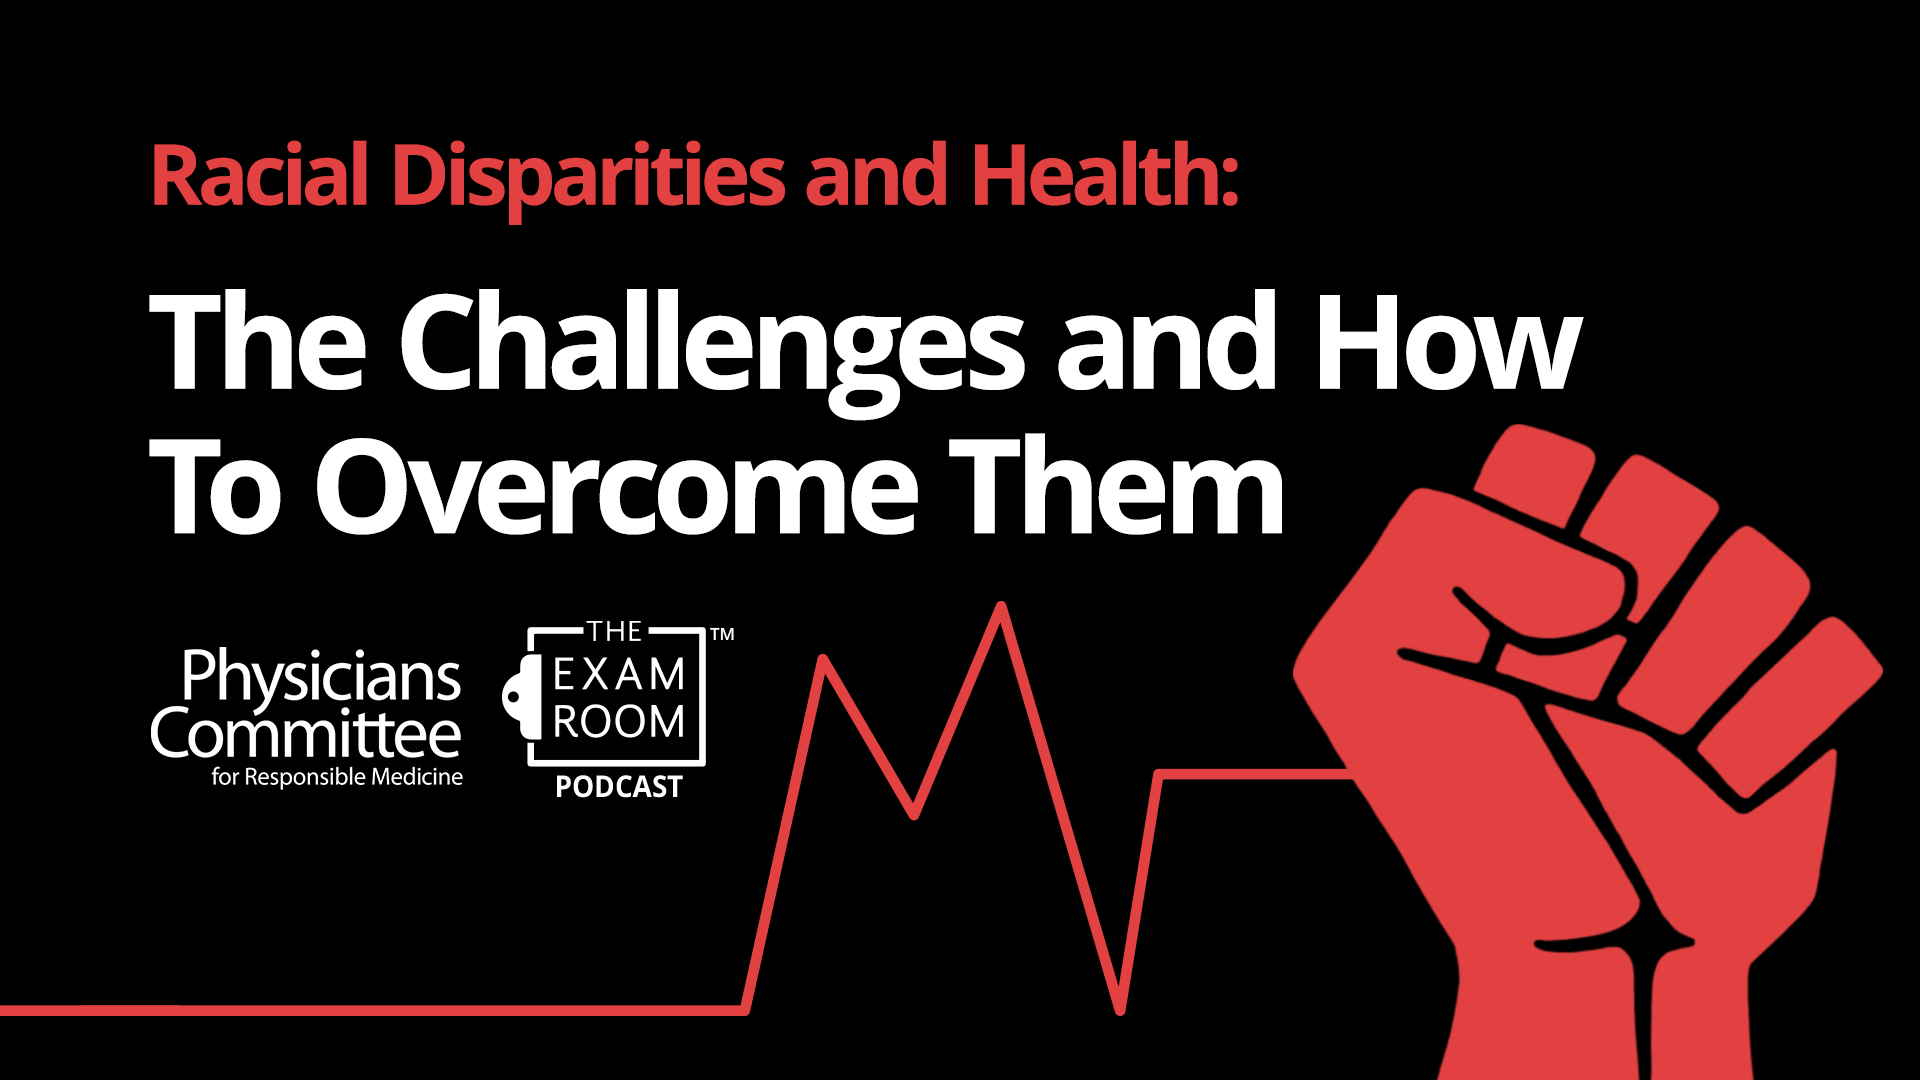 Racial Disparities and Health: The Challenges and How To Overcome Them